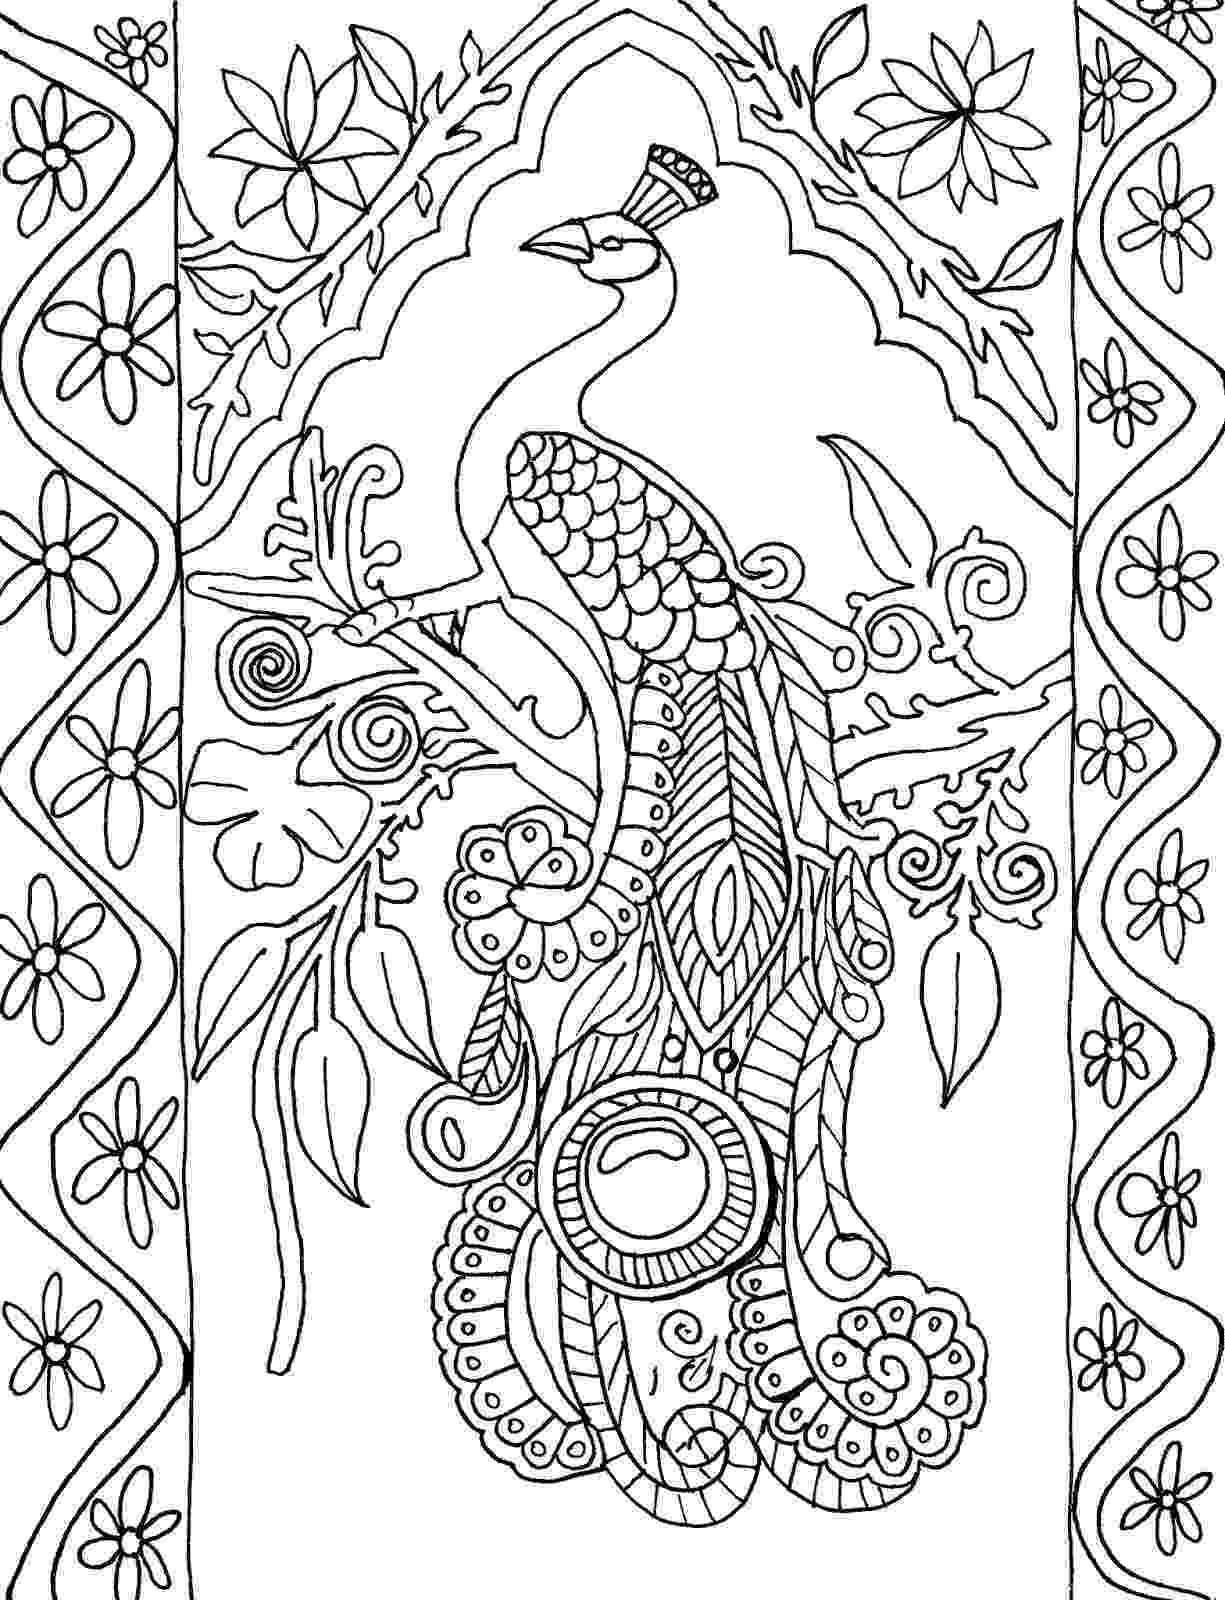 free peacock printables peacock adult coloring page favecraftscom free peacock printables 